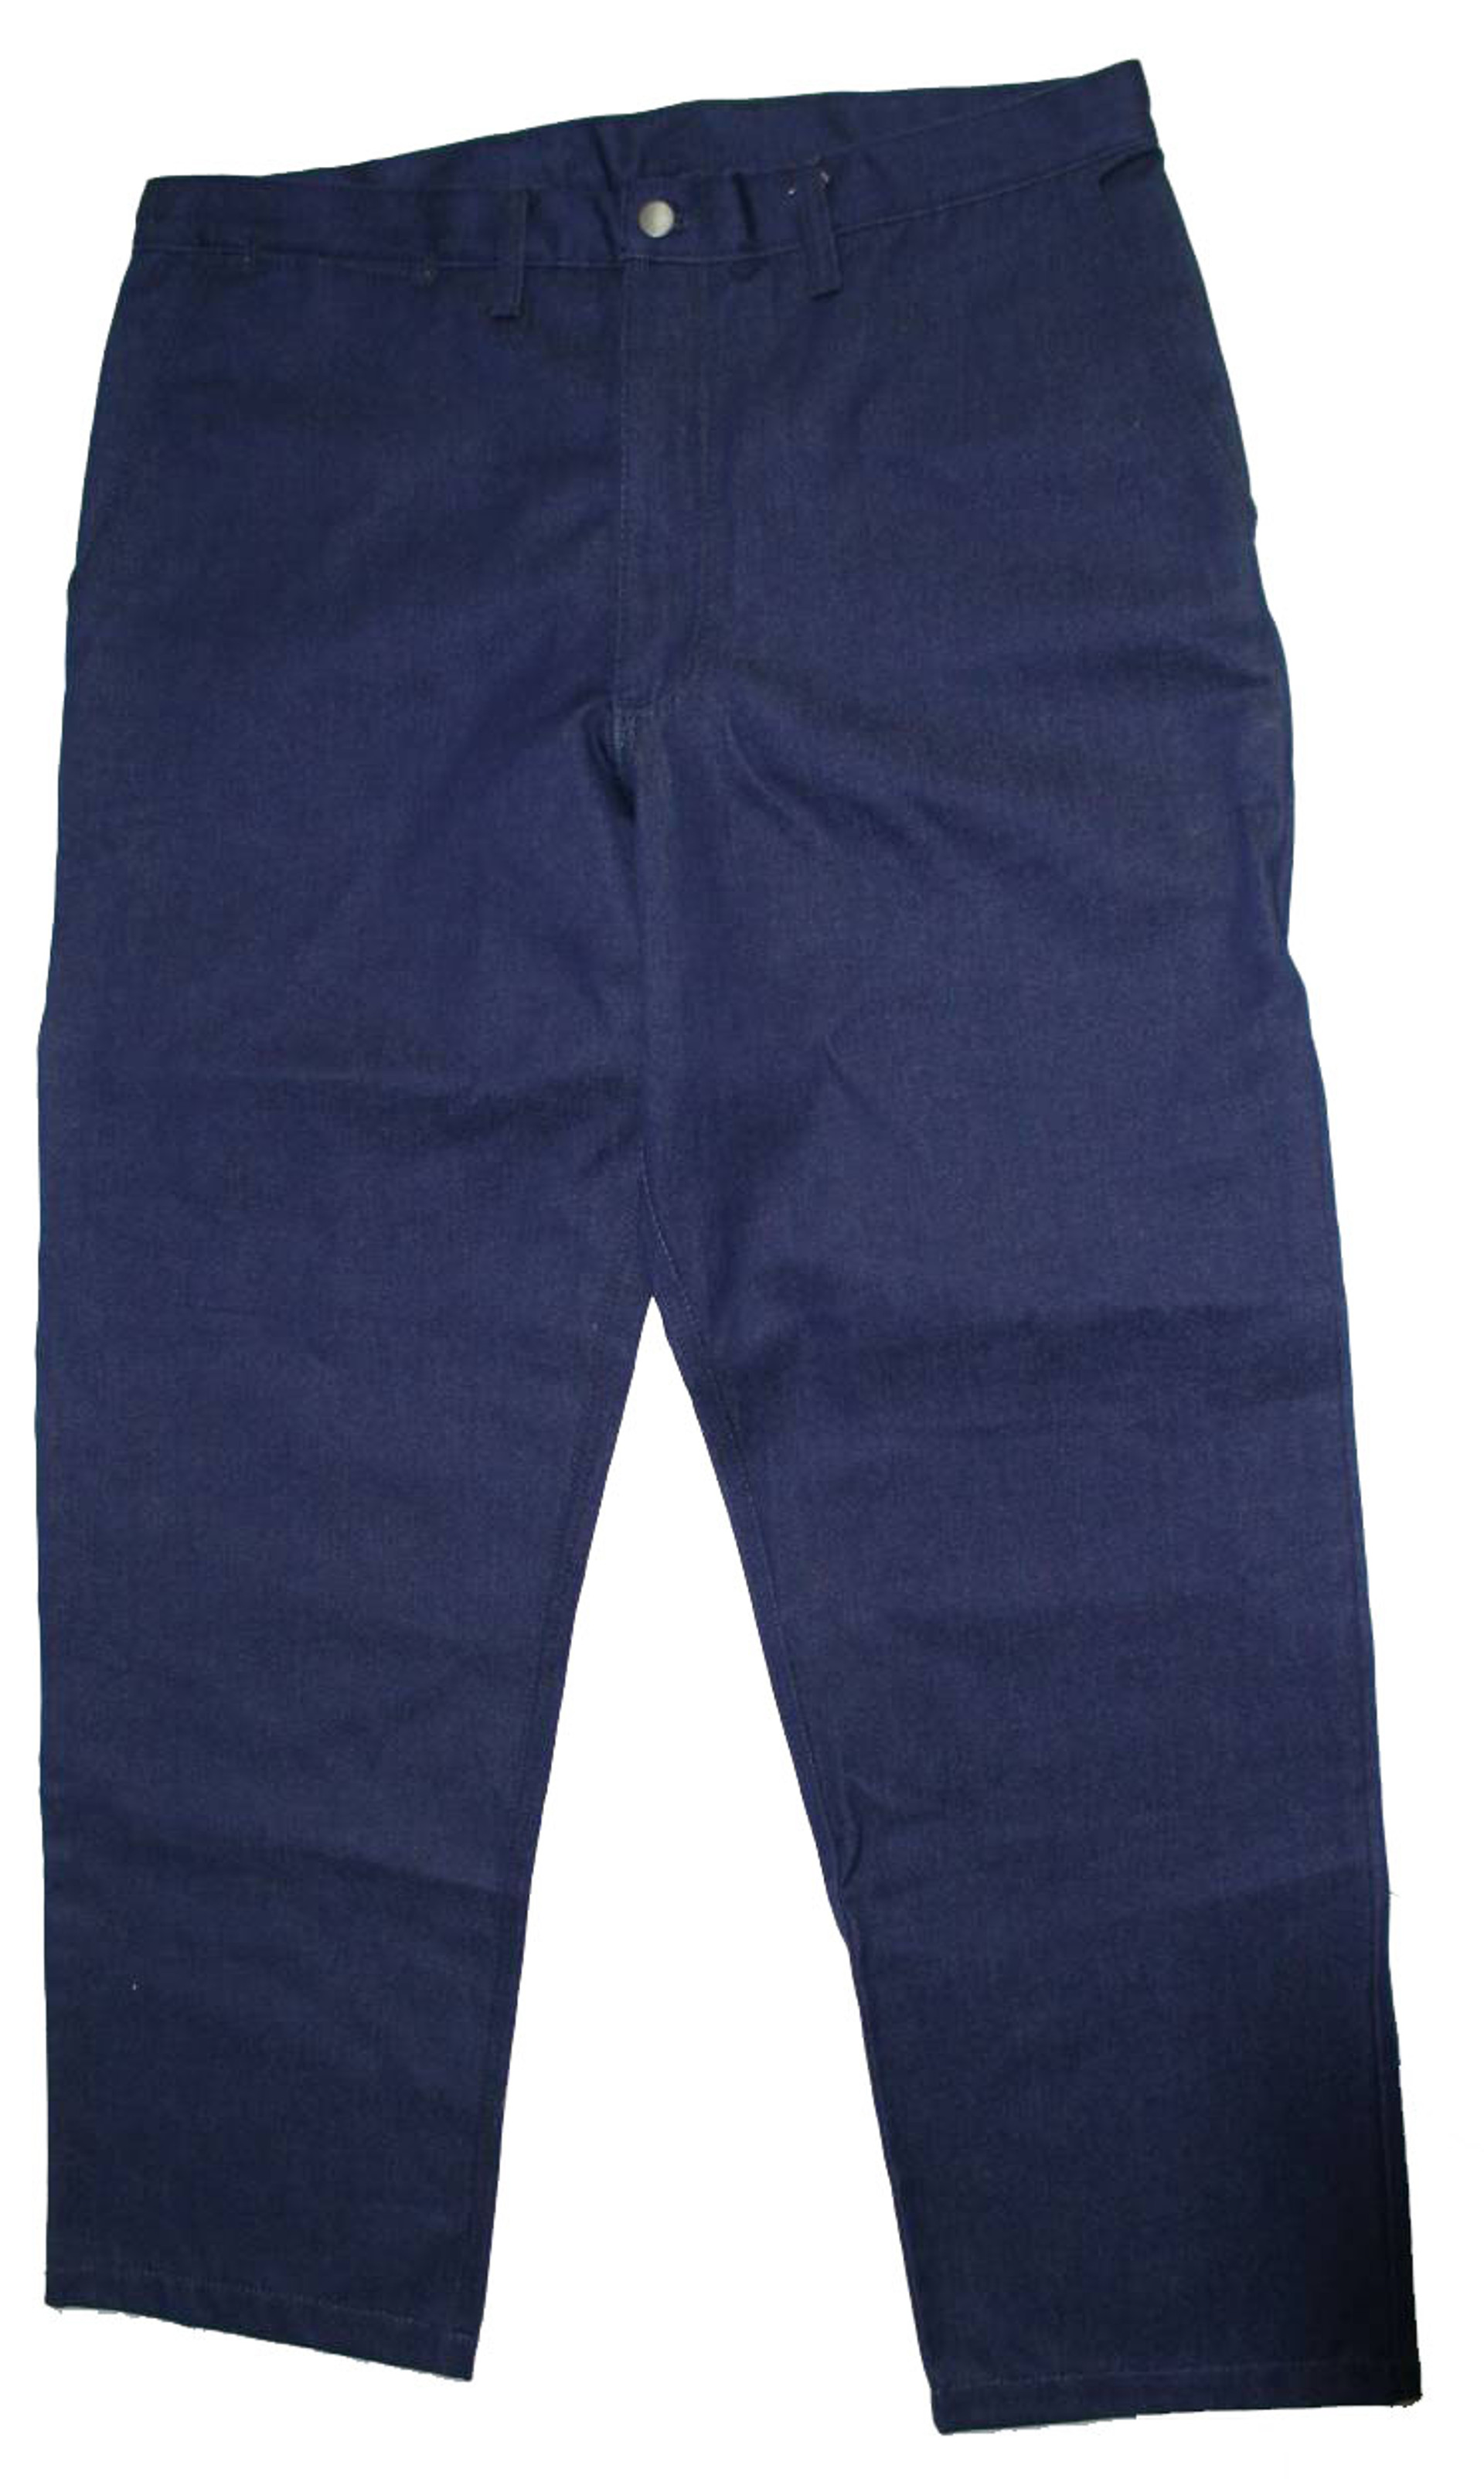 Work Trouser made of Shearers denim. - Squires Manufacturing Co Ltd